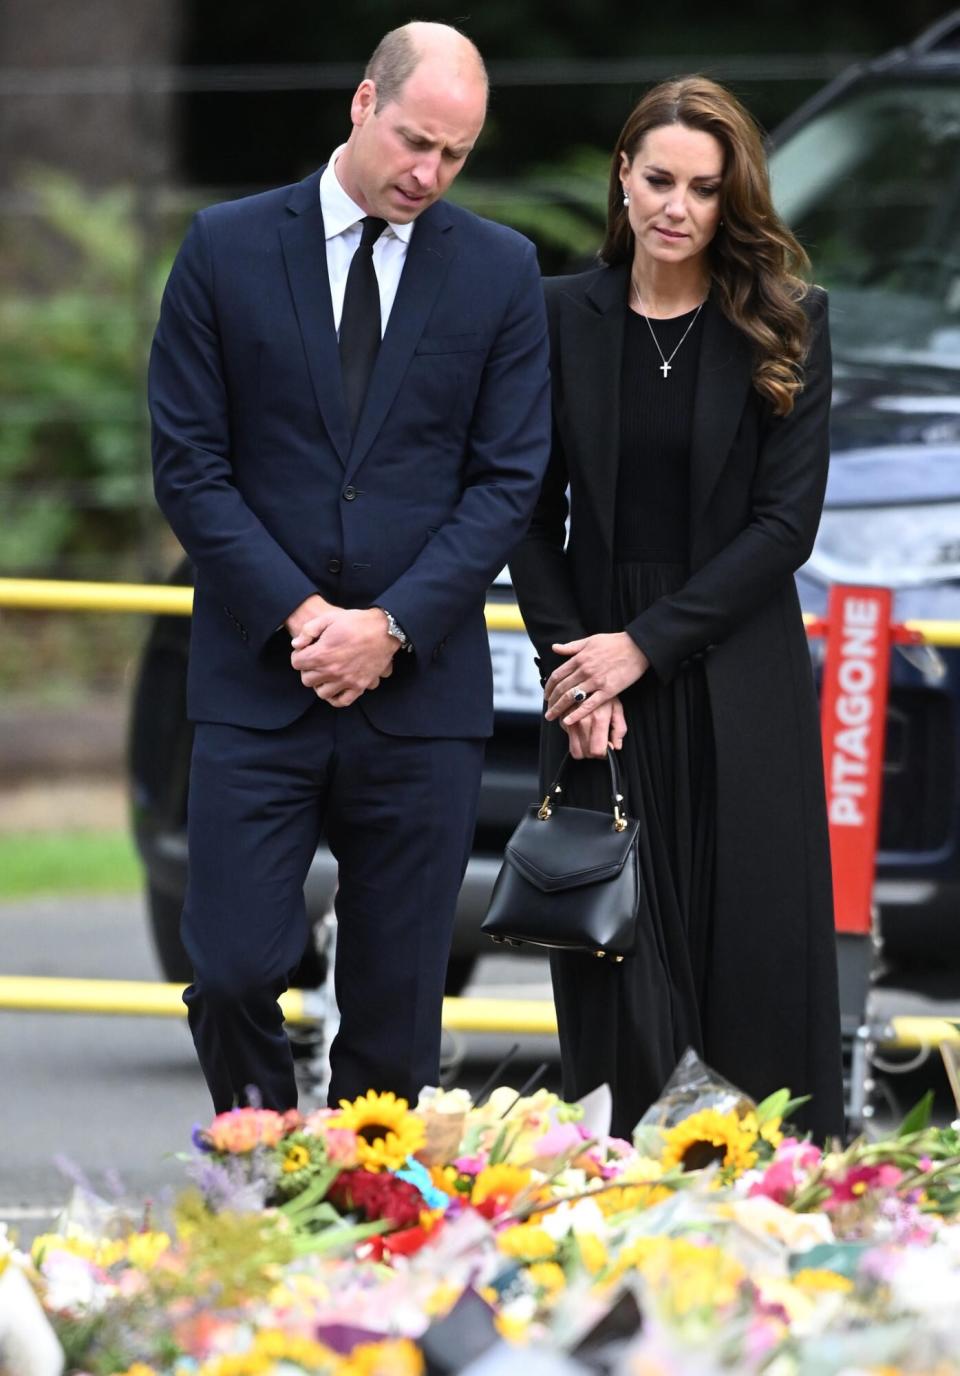 Prince William, Prince of Wales and Catherine, Princess of Wales view floral tributes at Sandringham